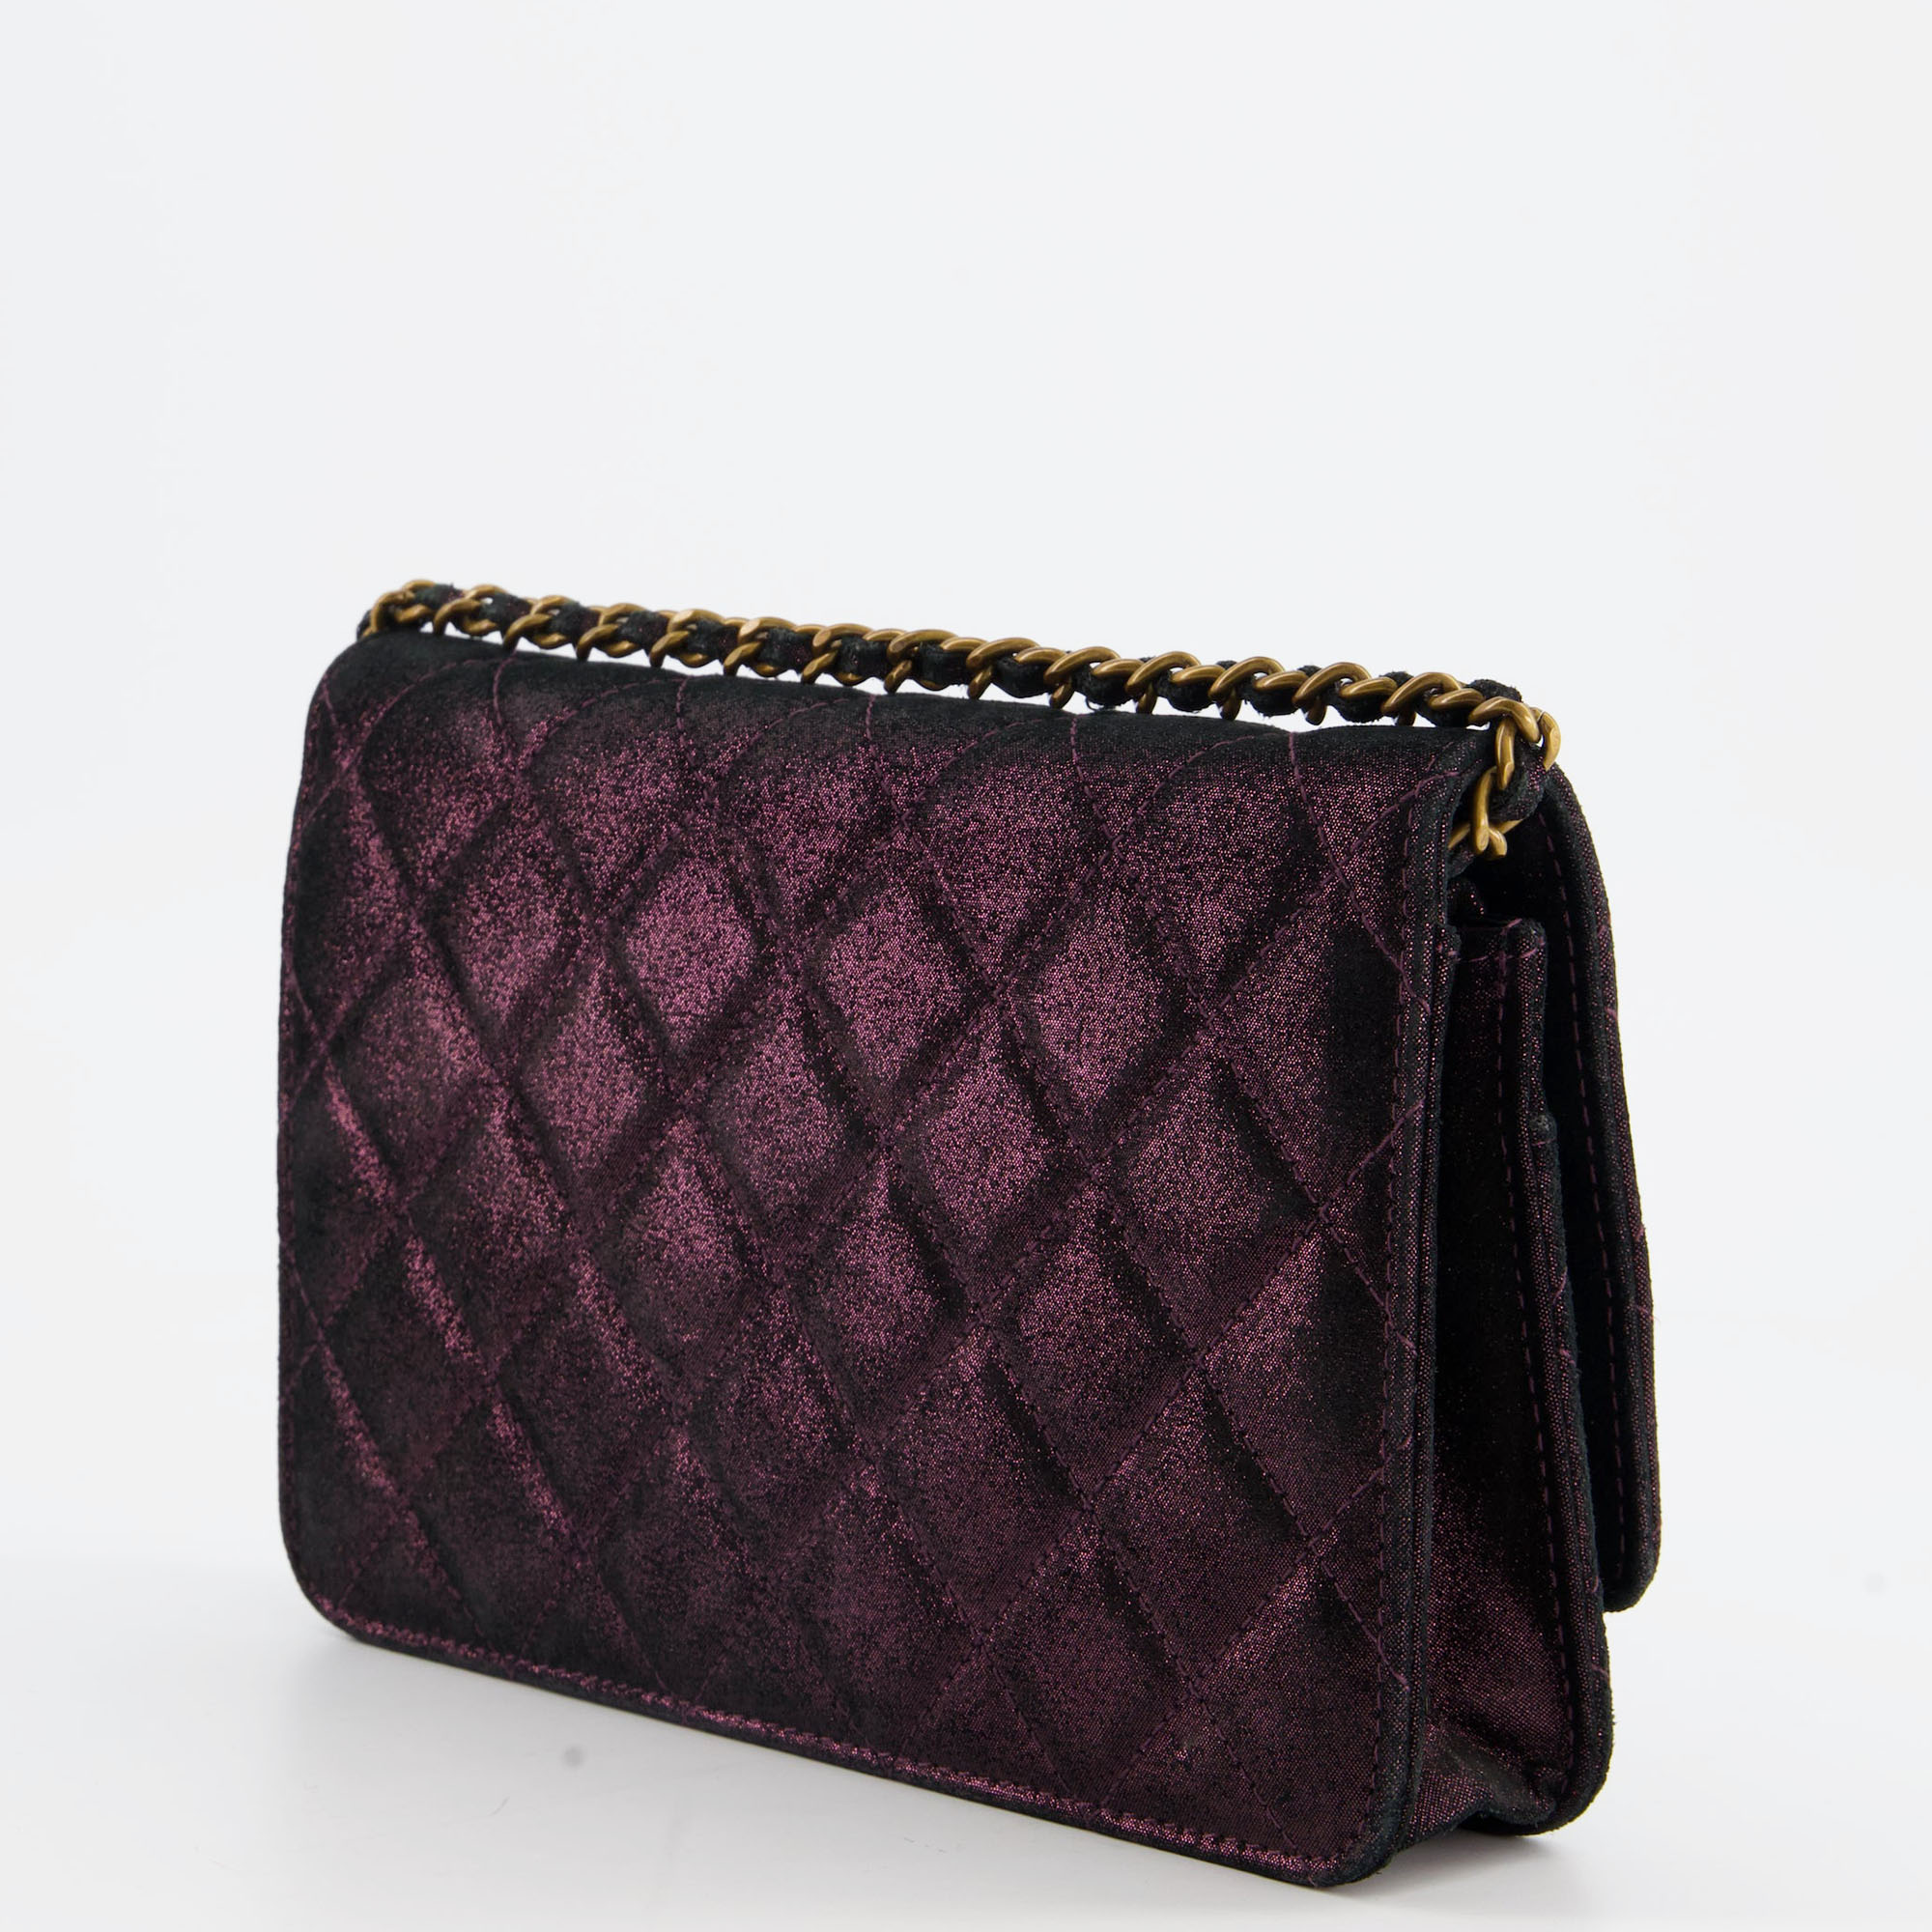 Chanel Metallic Purple Wallet On Chain With Antique Gold Hardware